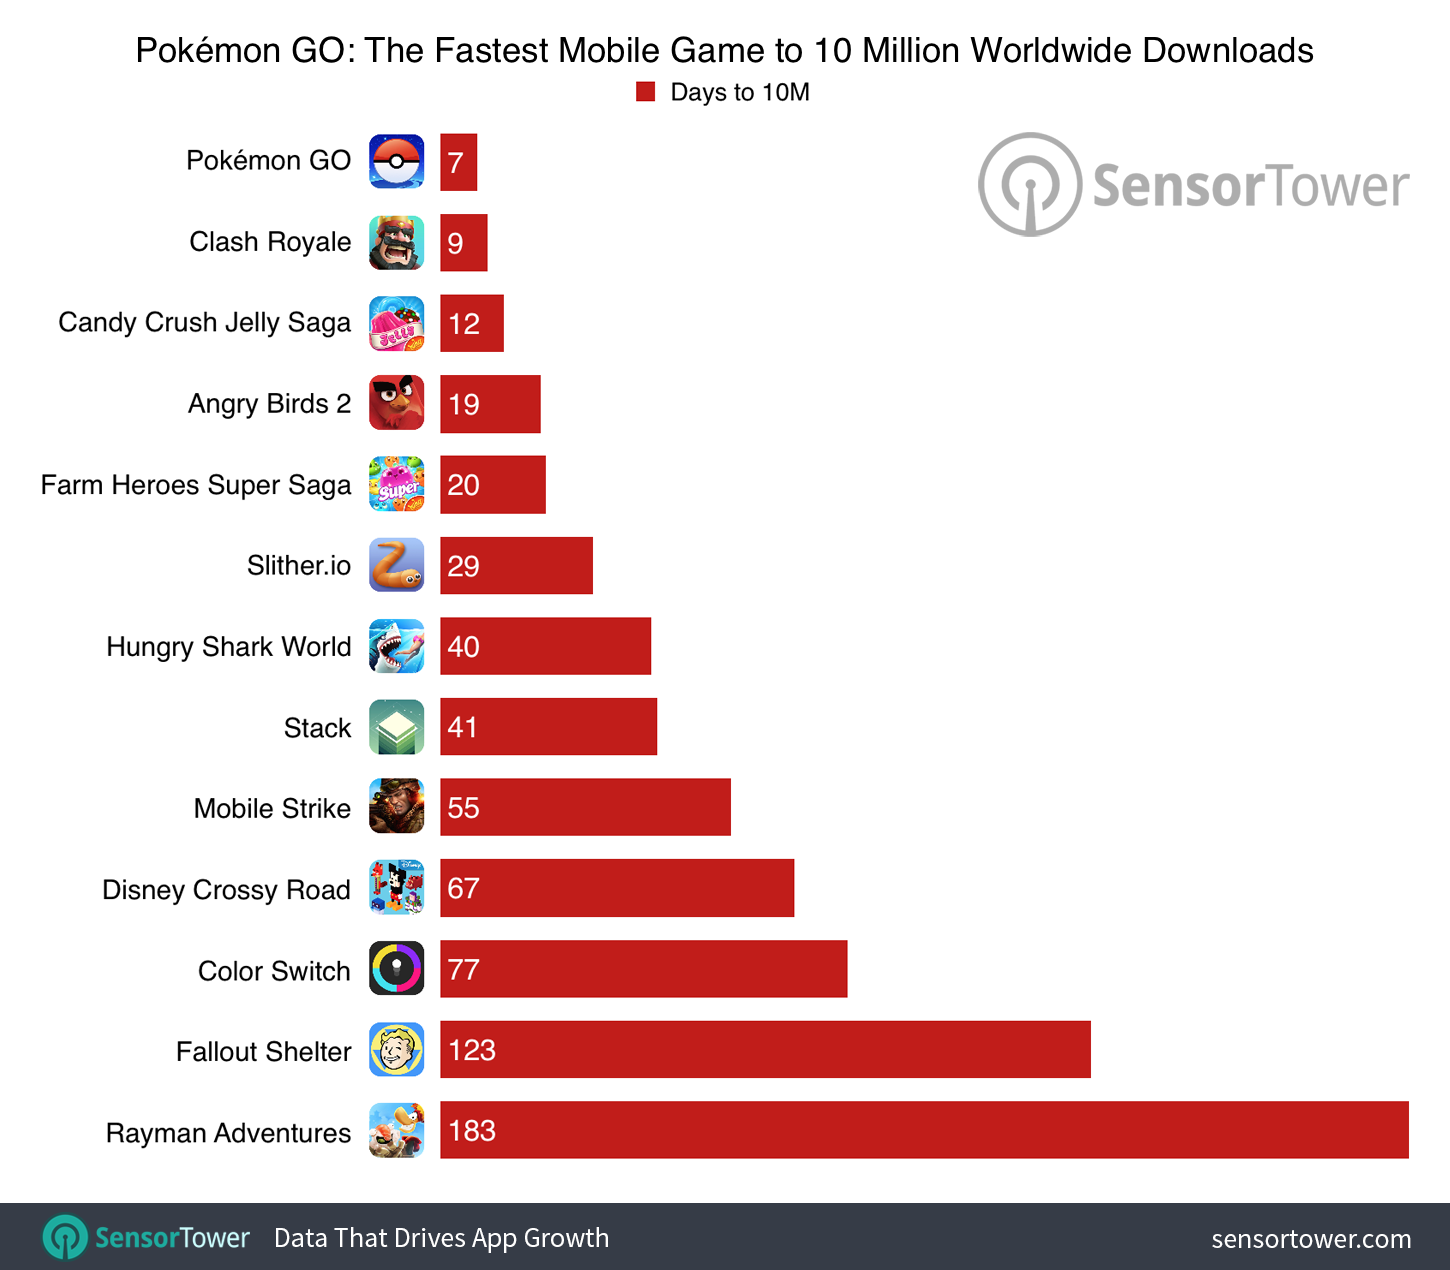 Number of Days It Took Pokemon GO to Reach 10 Million Worldwide Downloads Compared to Other Top Mobile Games